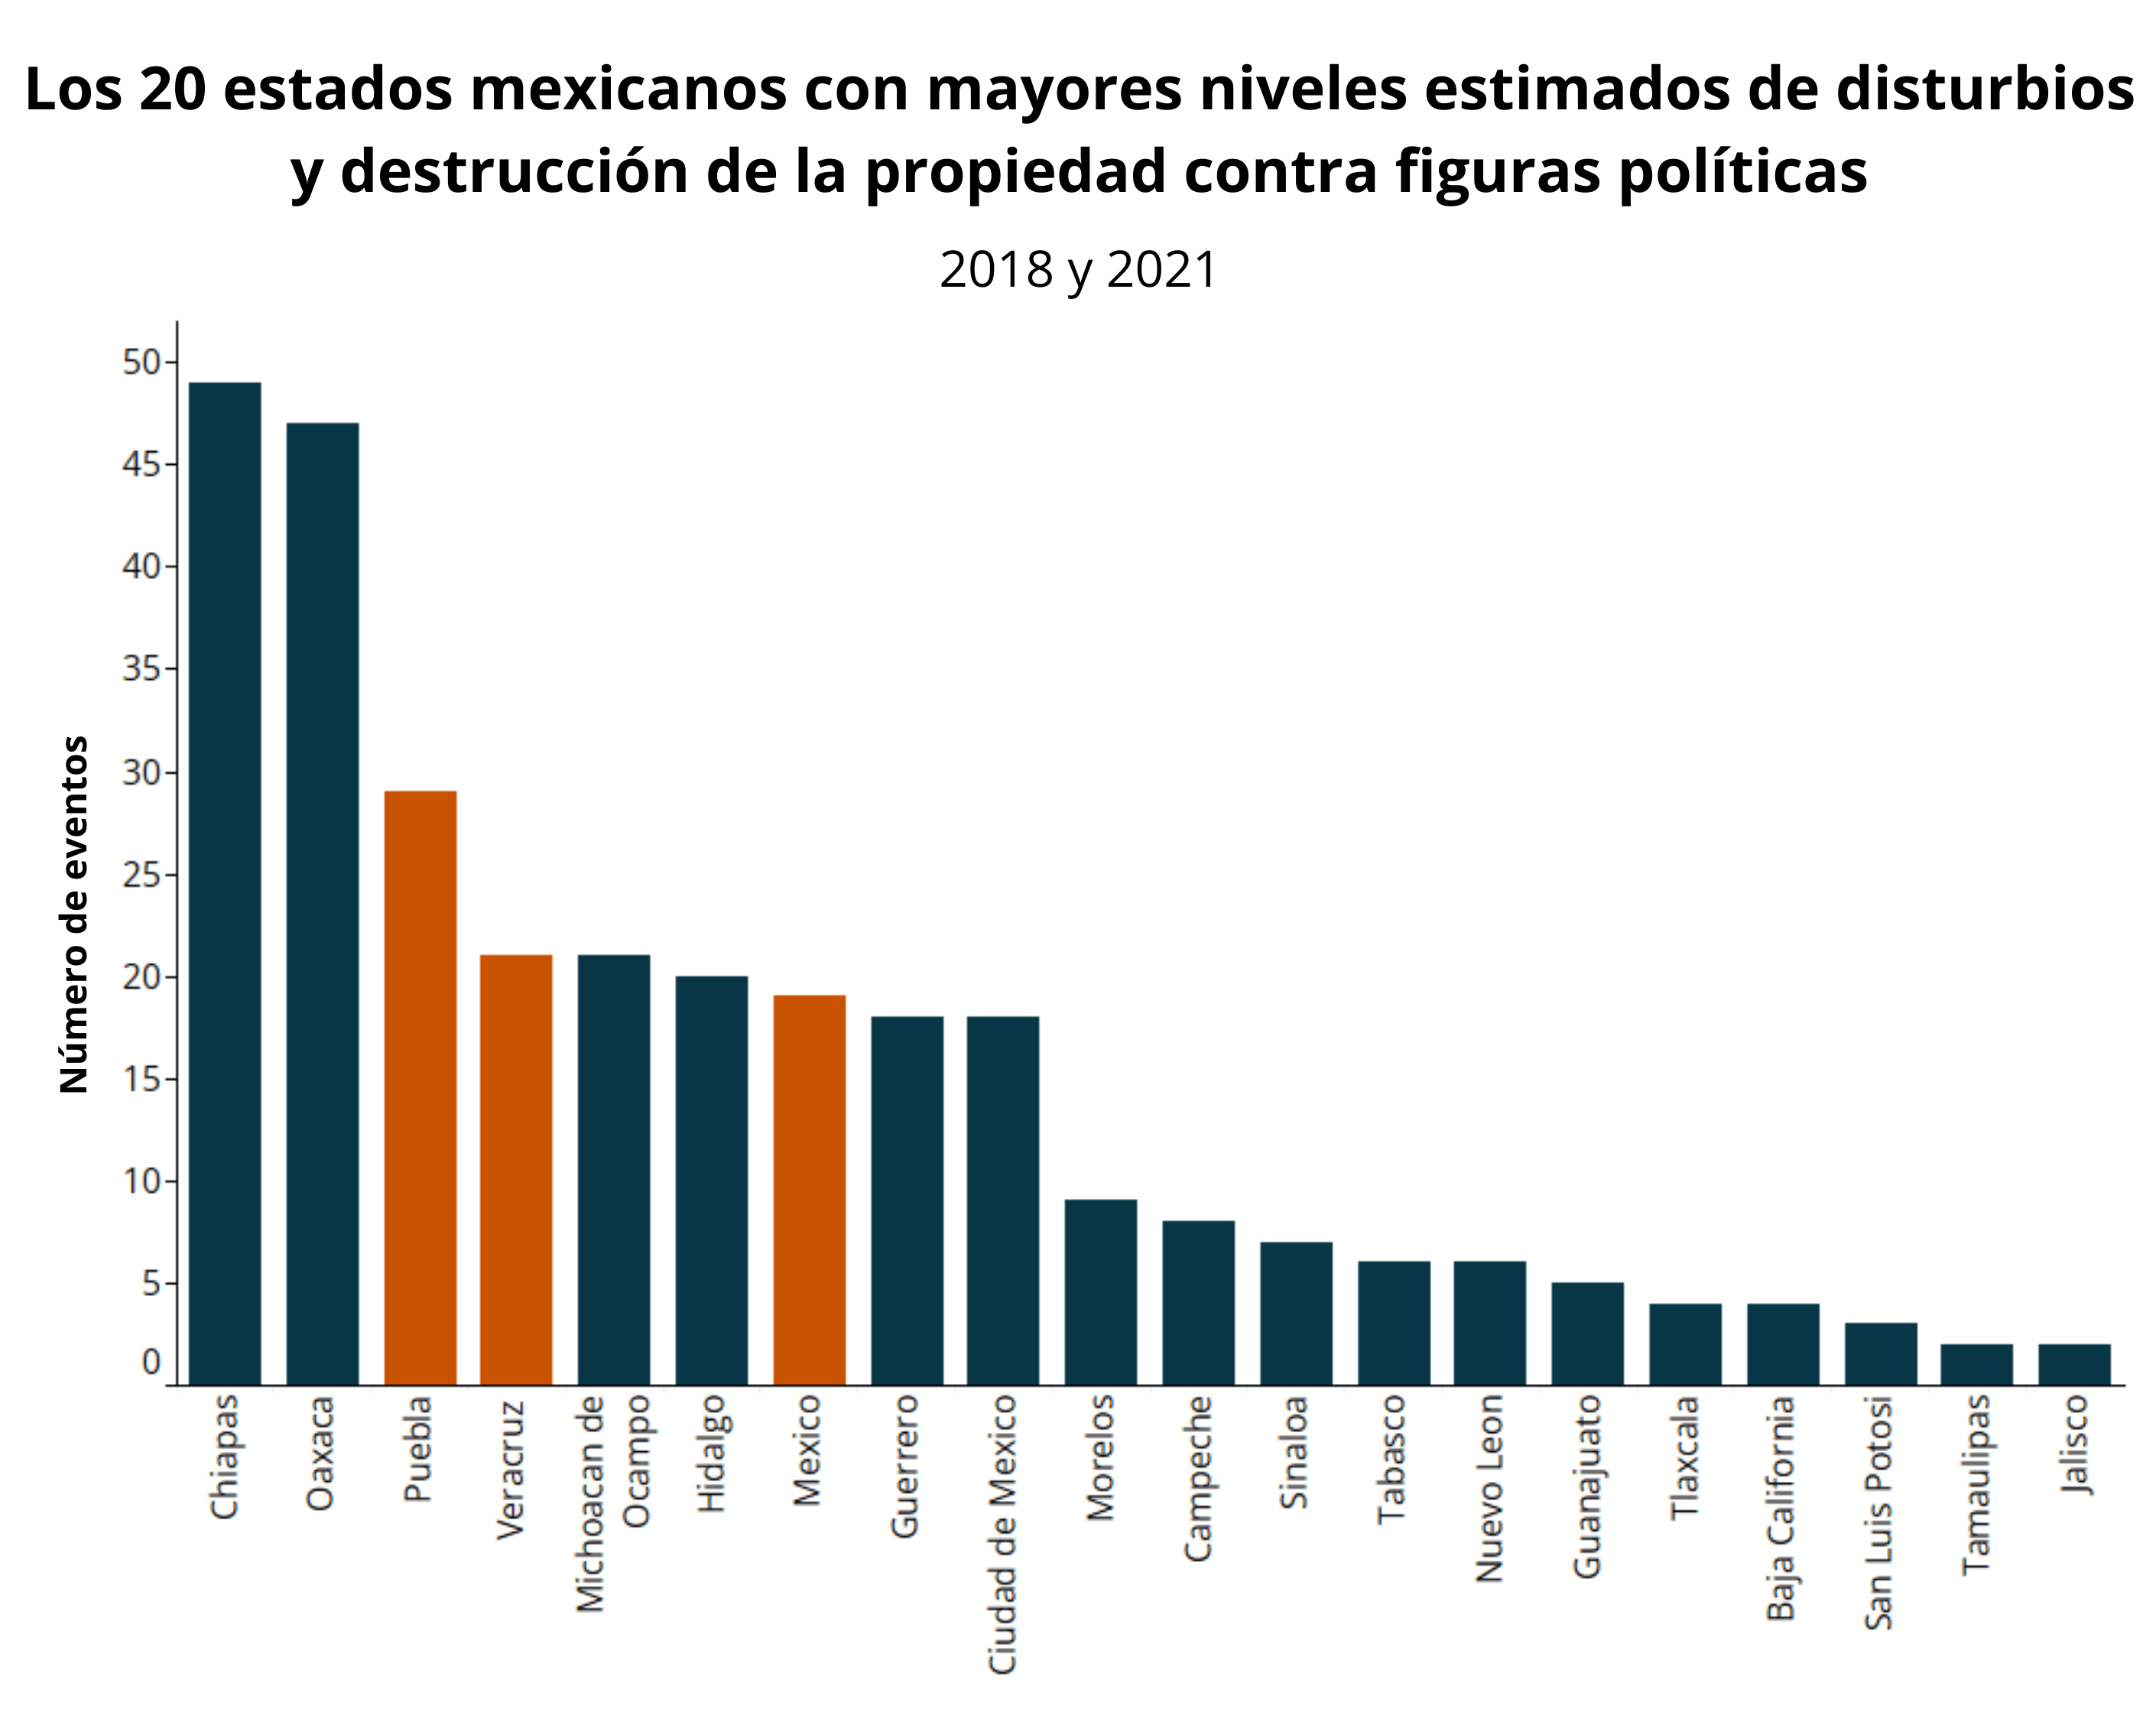 Bar Chart - SPANISH Election Watch - Top 20 Mexican States with Highest estimated levels of Riots and property destruction targeting political figures - 2018 and 2021